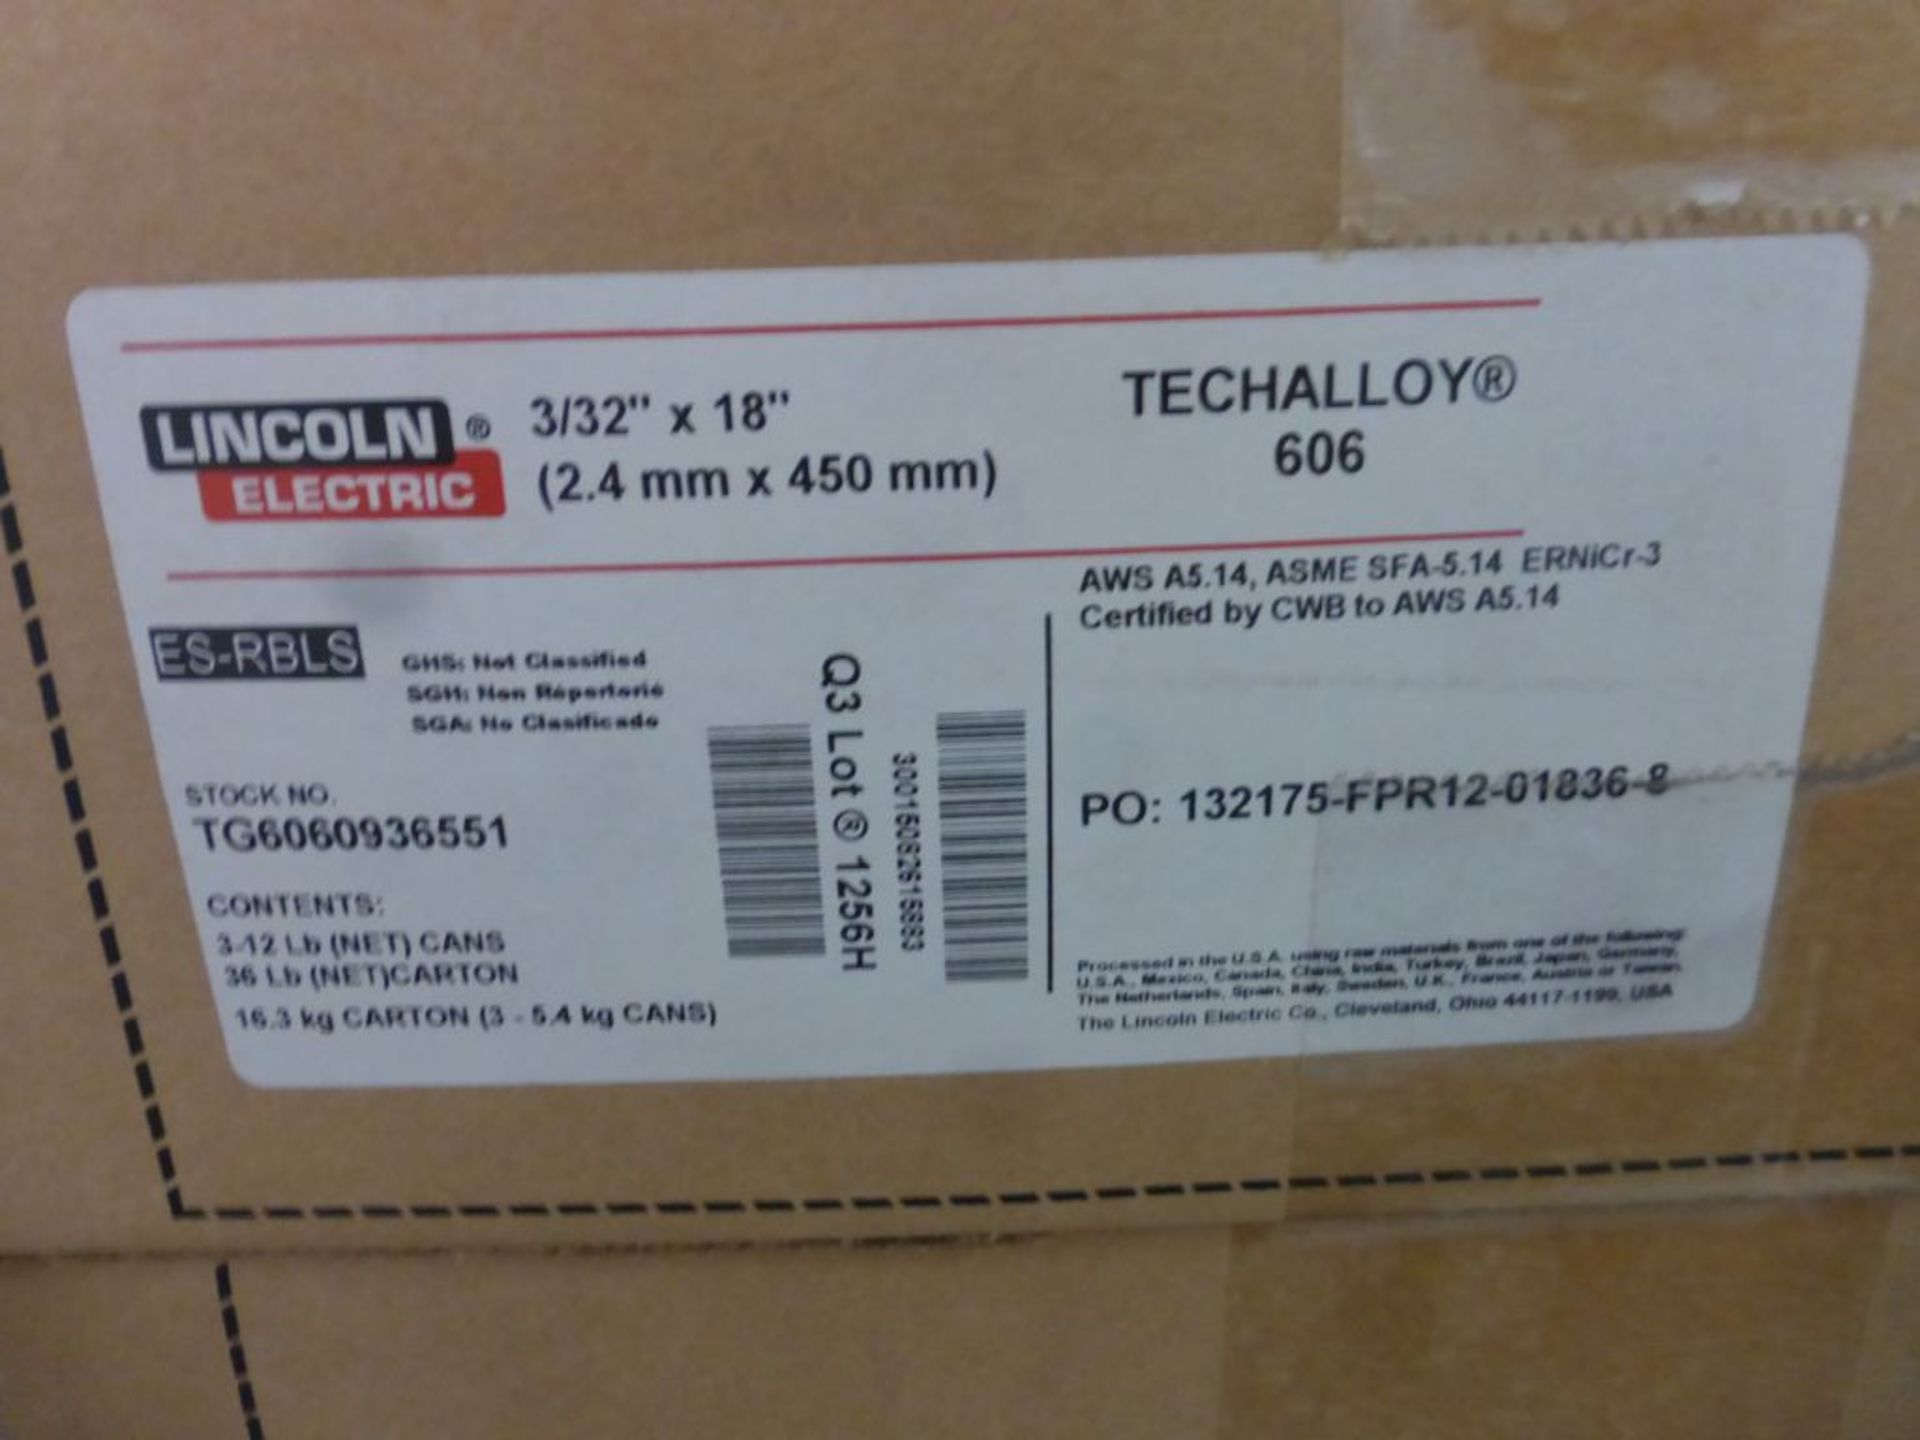 Lot of (8) Boxes of Lincoln Electric Techalloy 606 Welding Wire | Stock No. TG6060936551; 3/32" x - Image 6 of 12